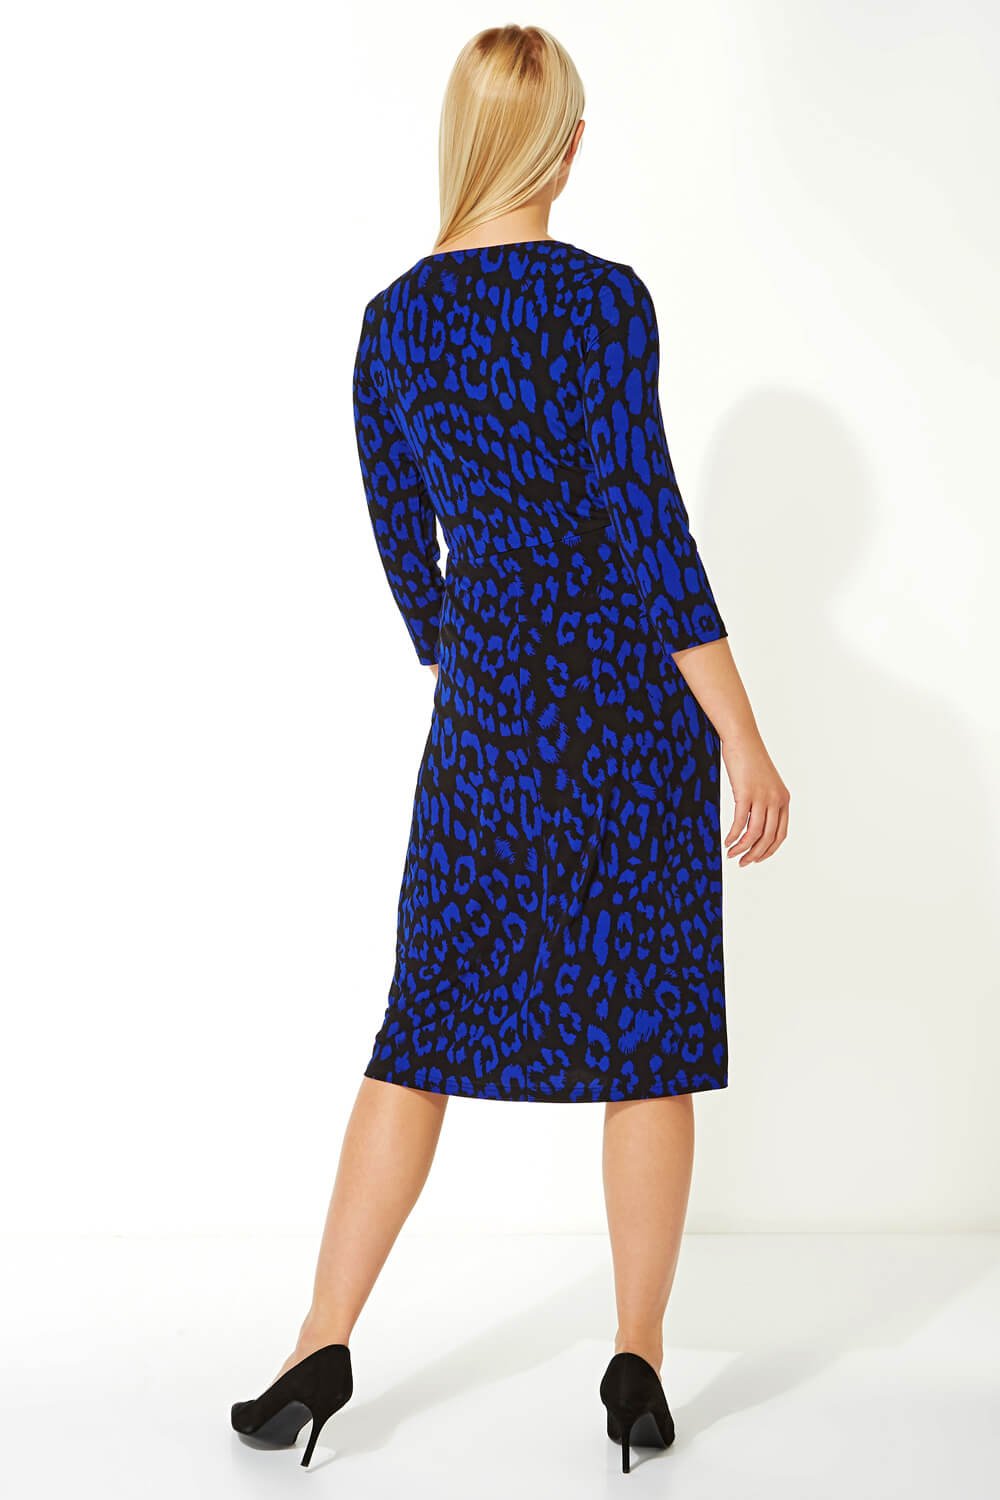 Royal Blue Animal Print Fit And Flare Dress, Image 3 of 5